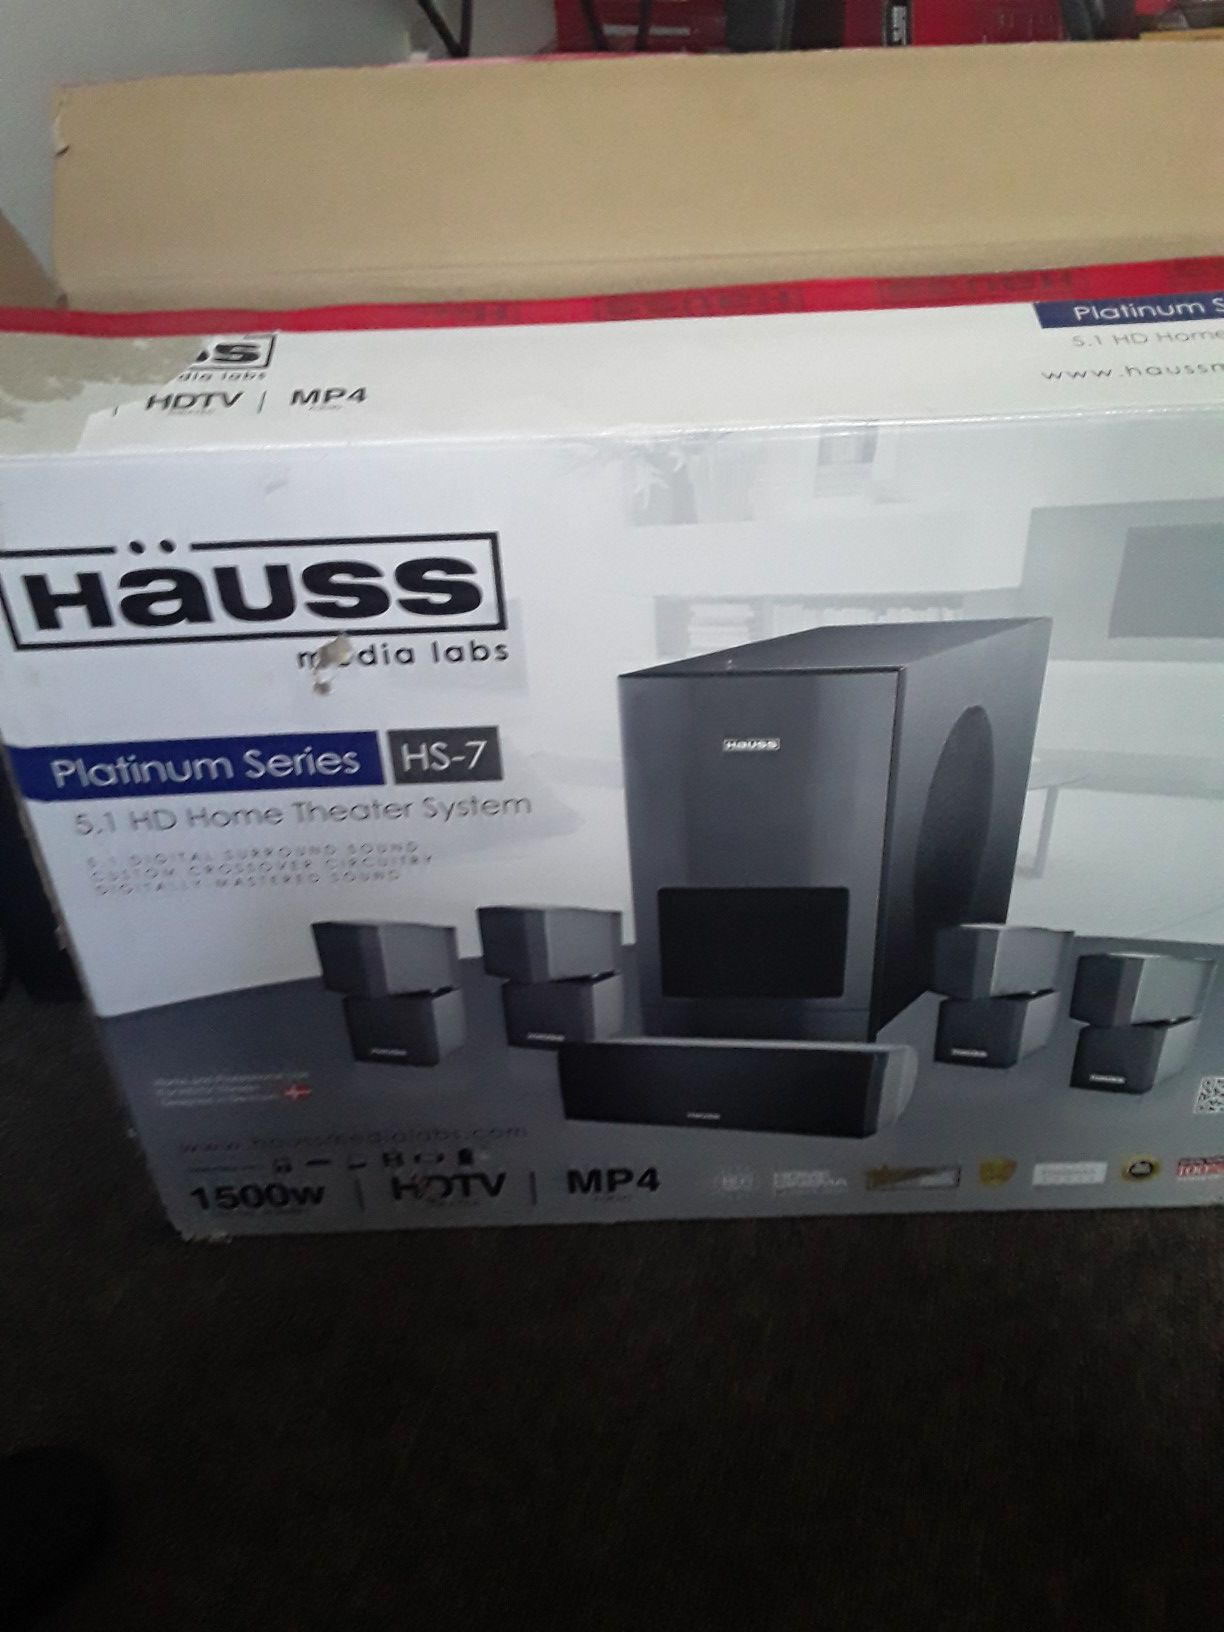 5.1 HD HOME THEATER SYSTEM